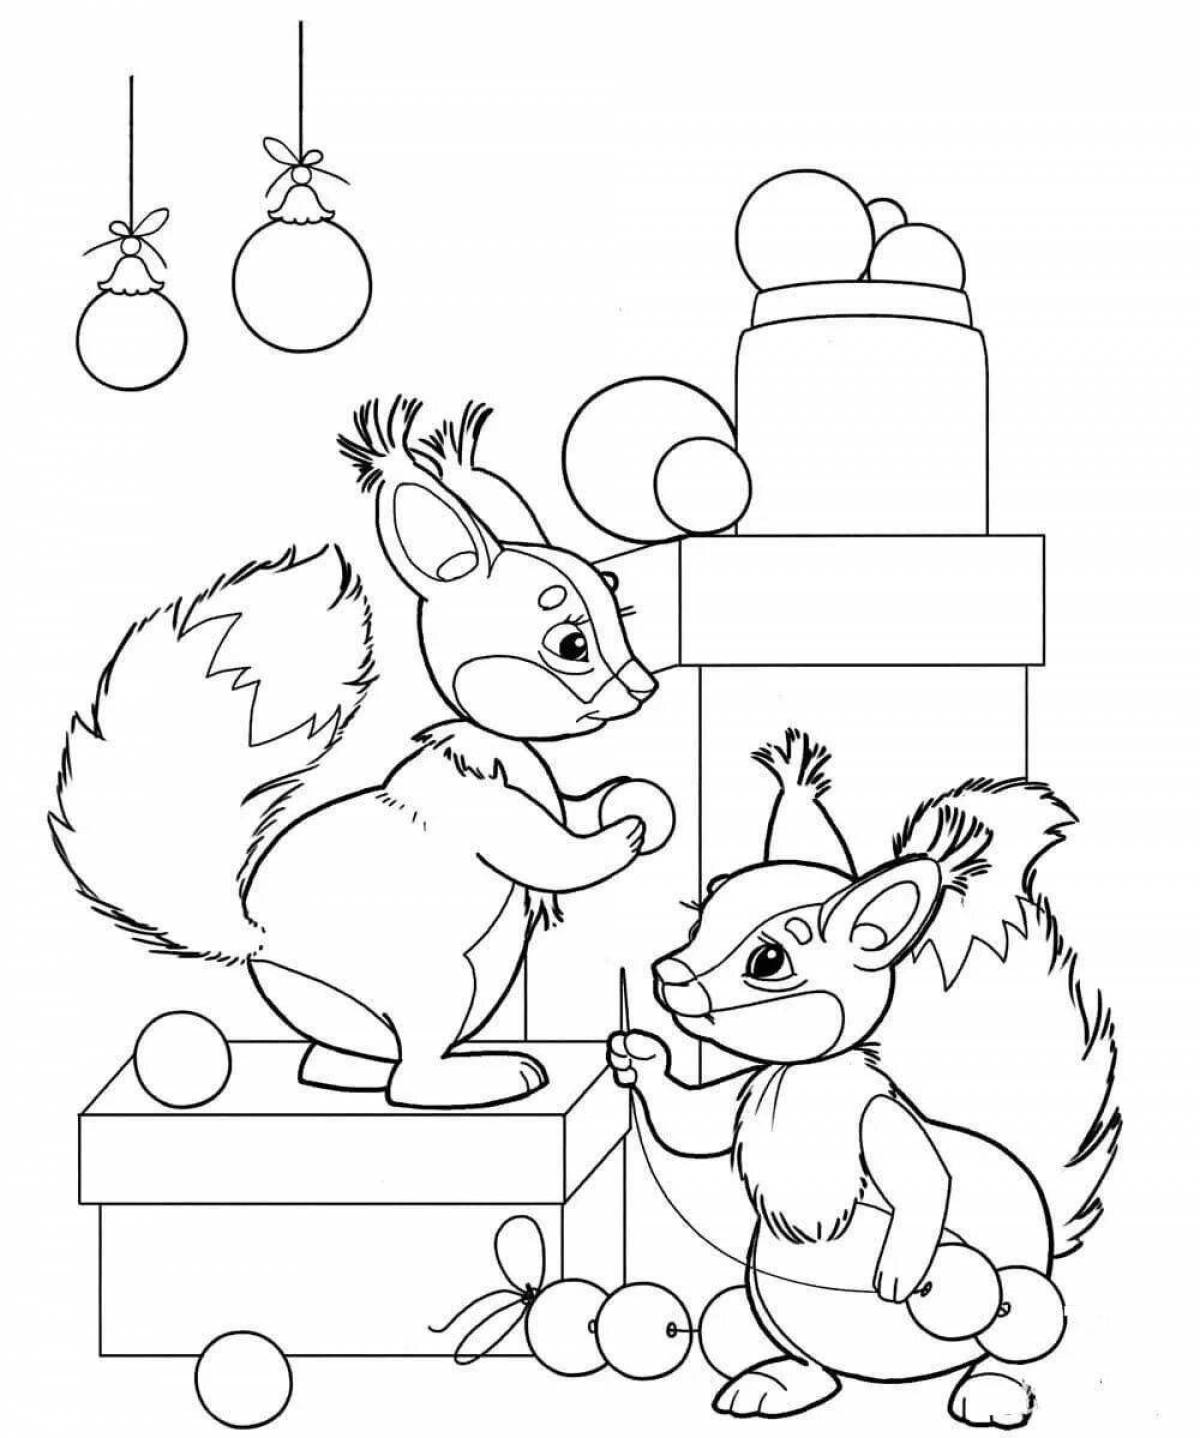 A wonderful squirrel coloring book for children 2-3 years old